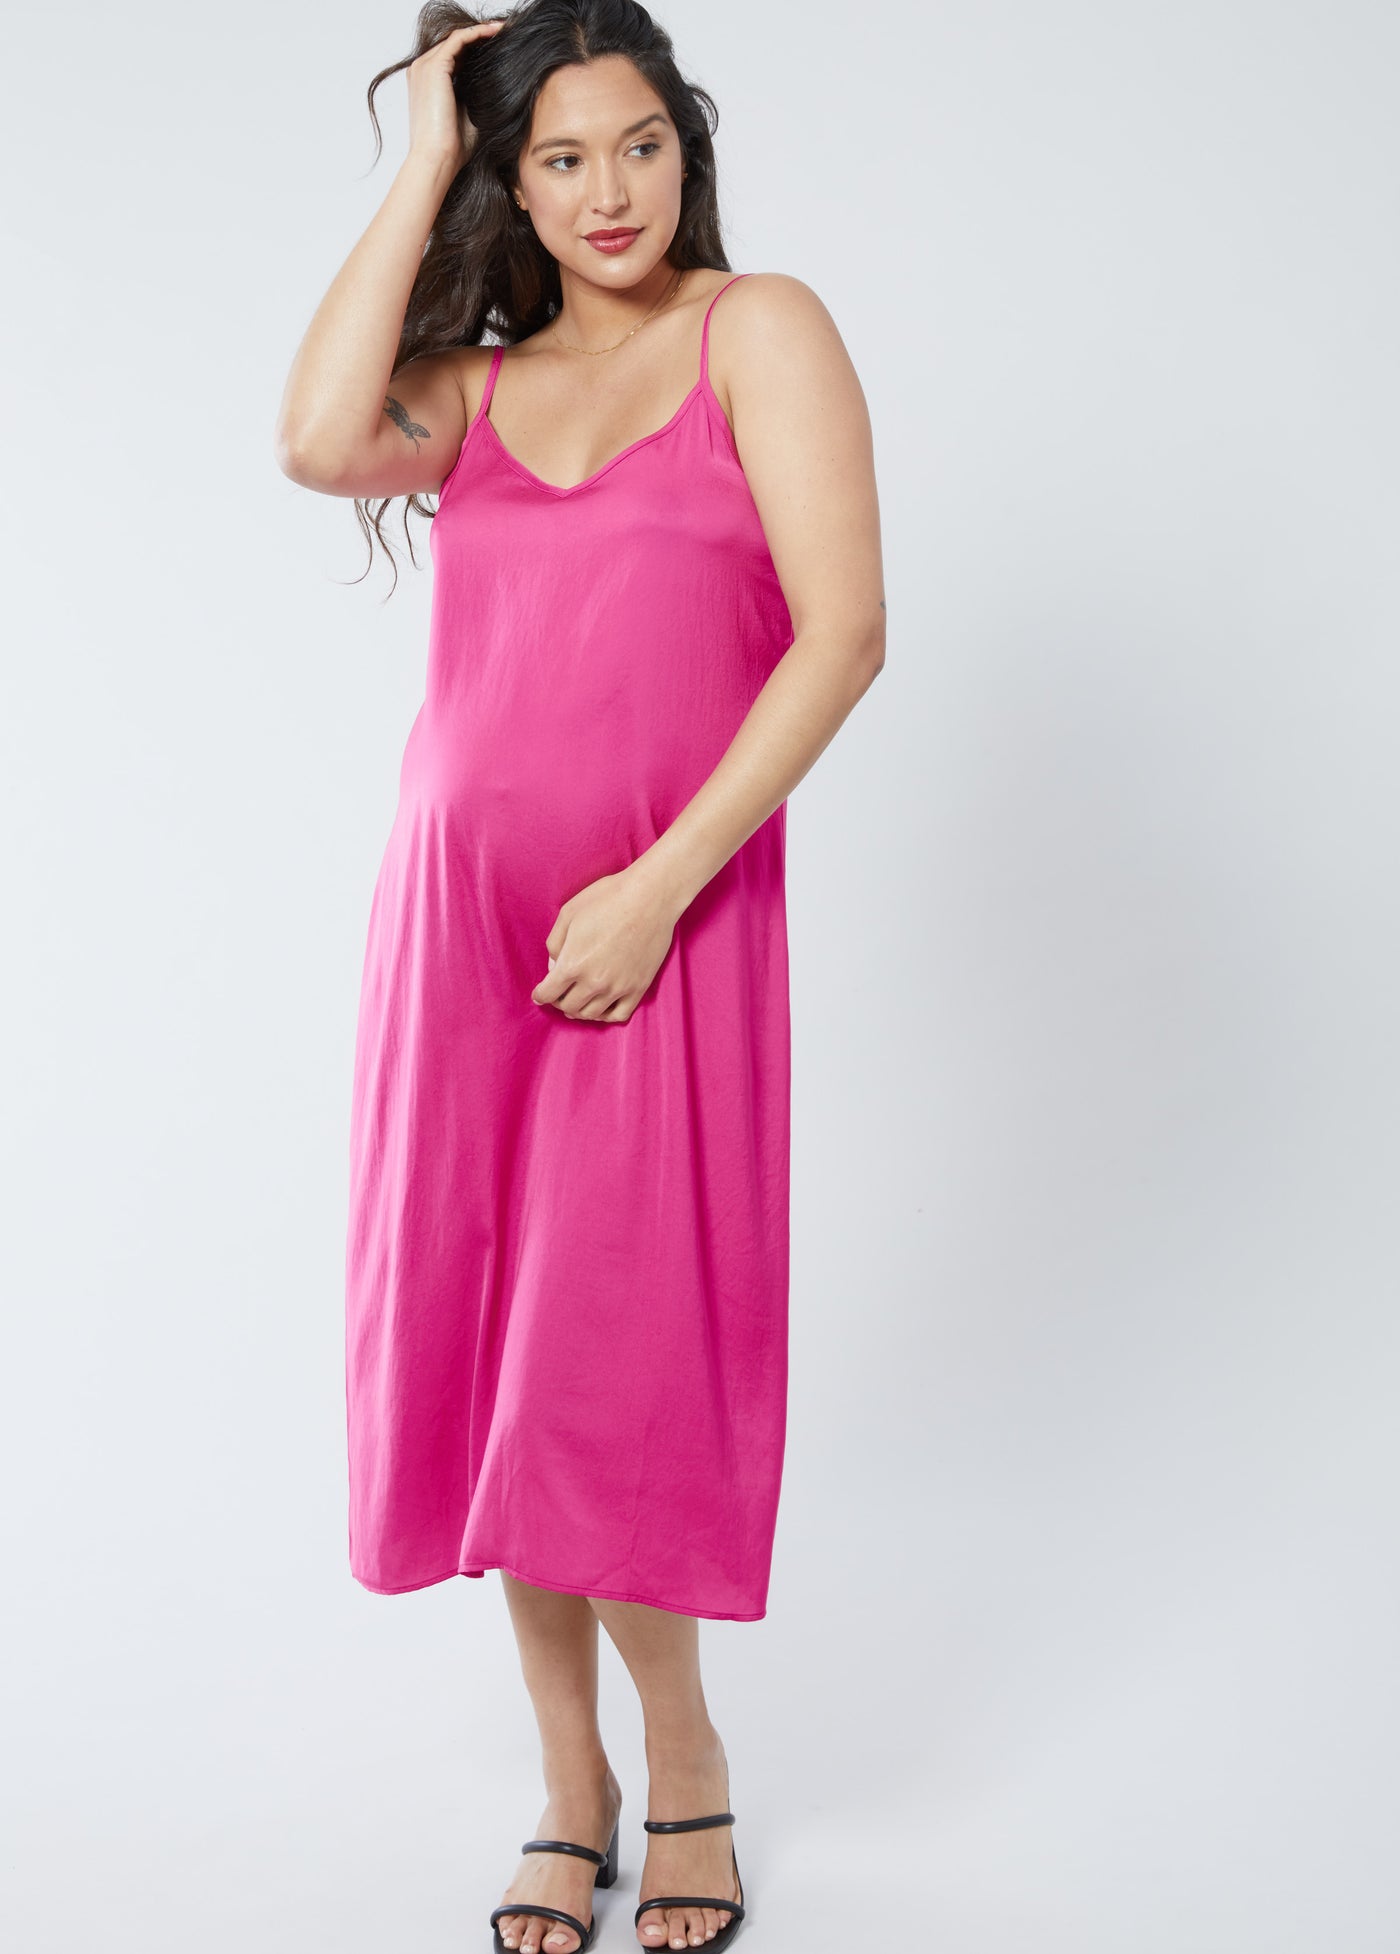 BreAuna is 7 months pregnant, 5'9" and wearing a size small||Raspberry Rose